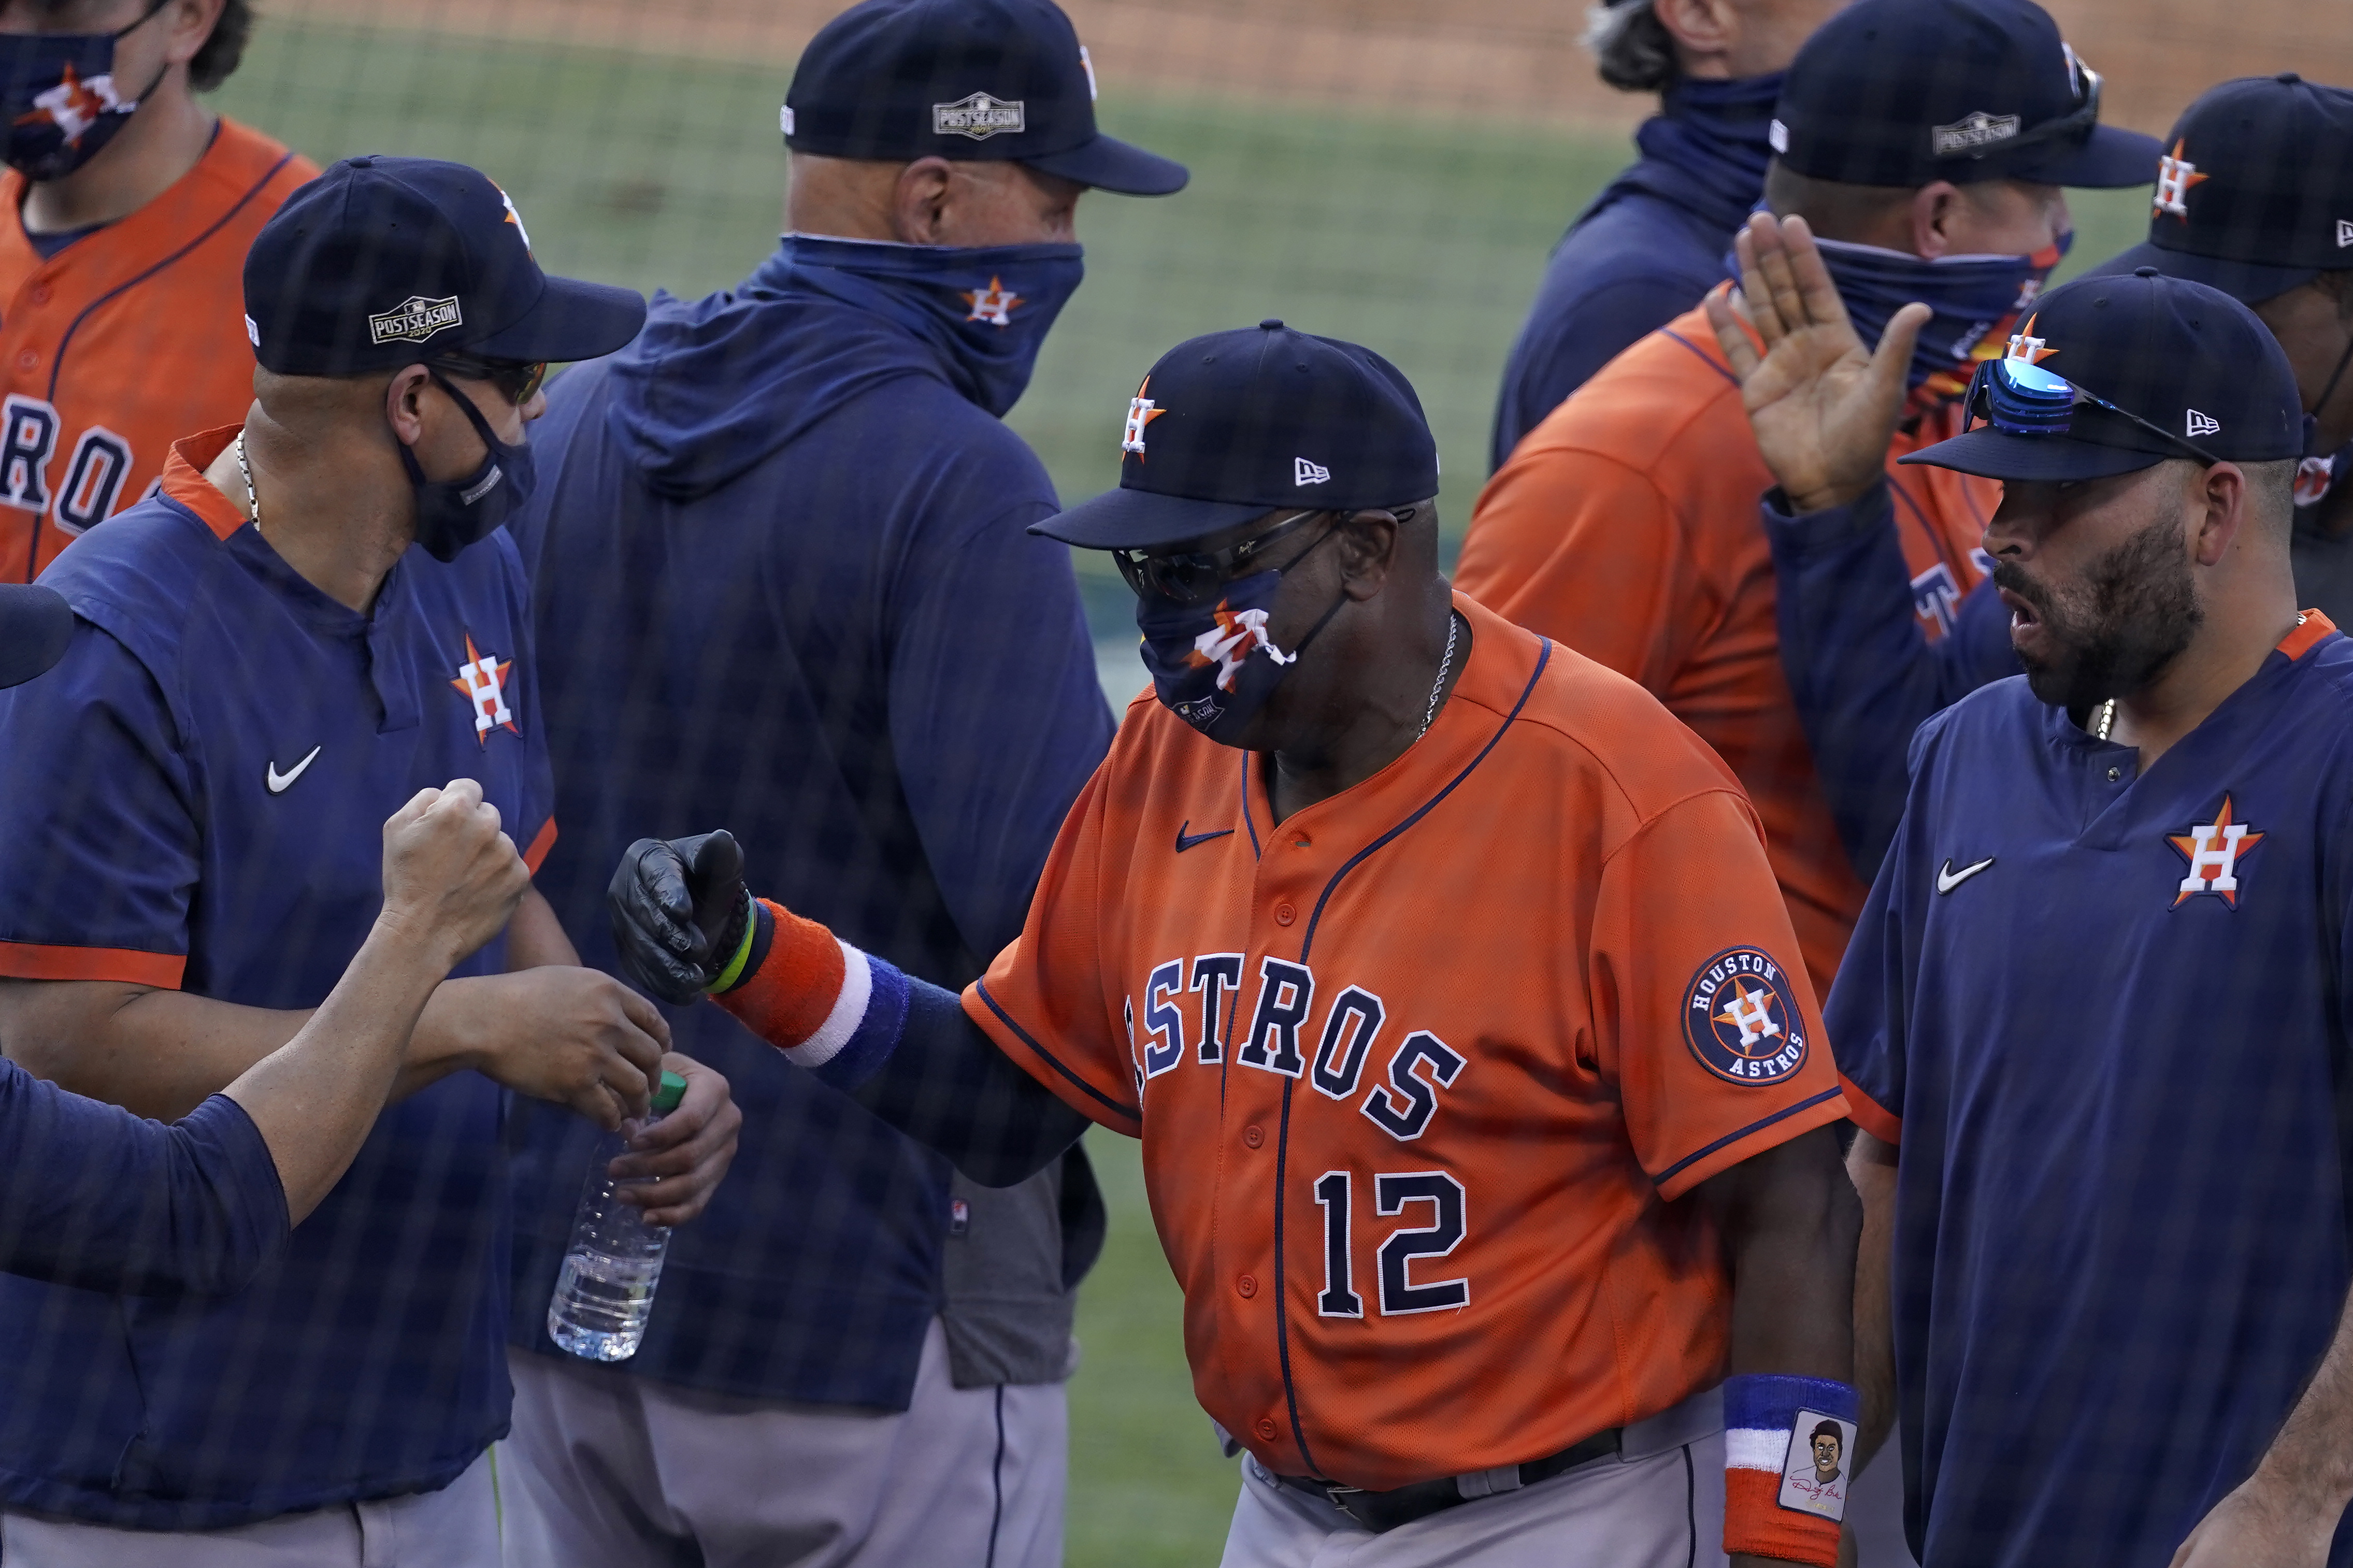 Opening-Day excitement never gets old for Astros manager A.J. Hinch